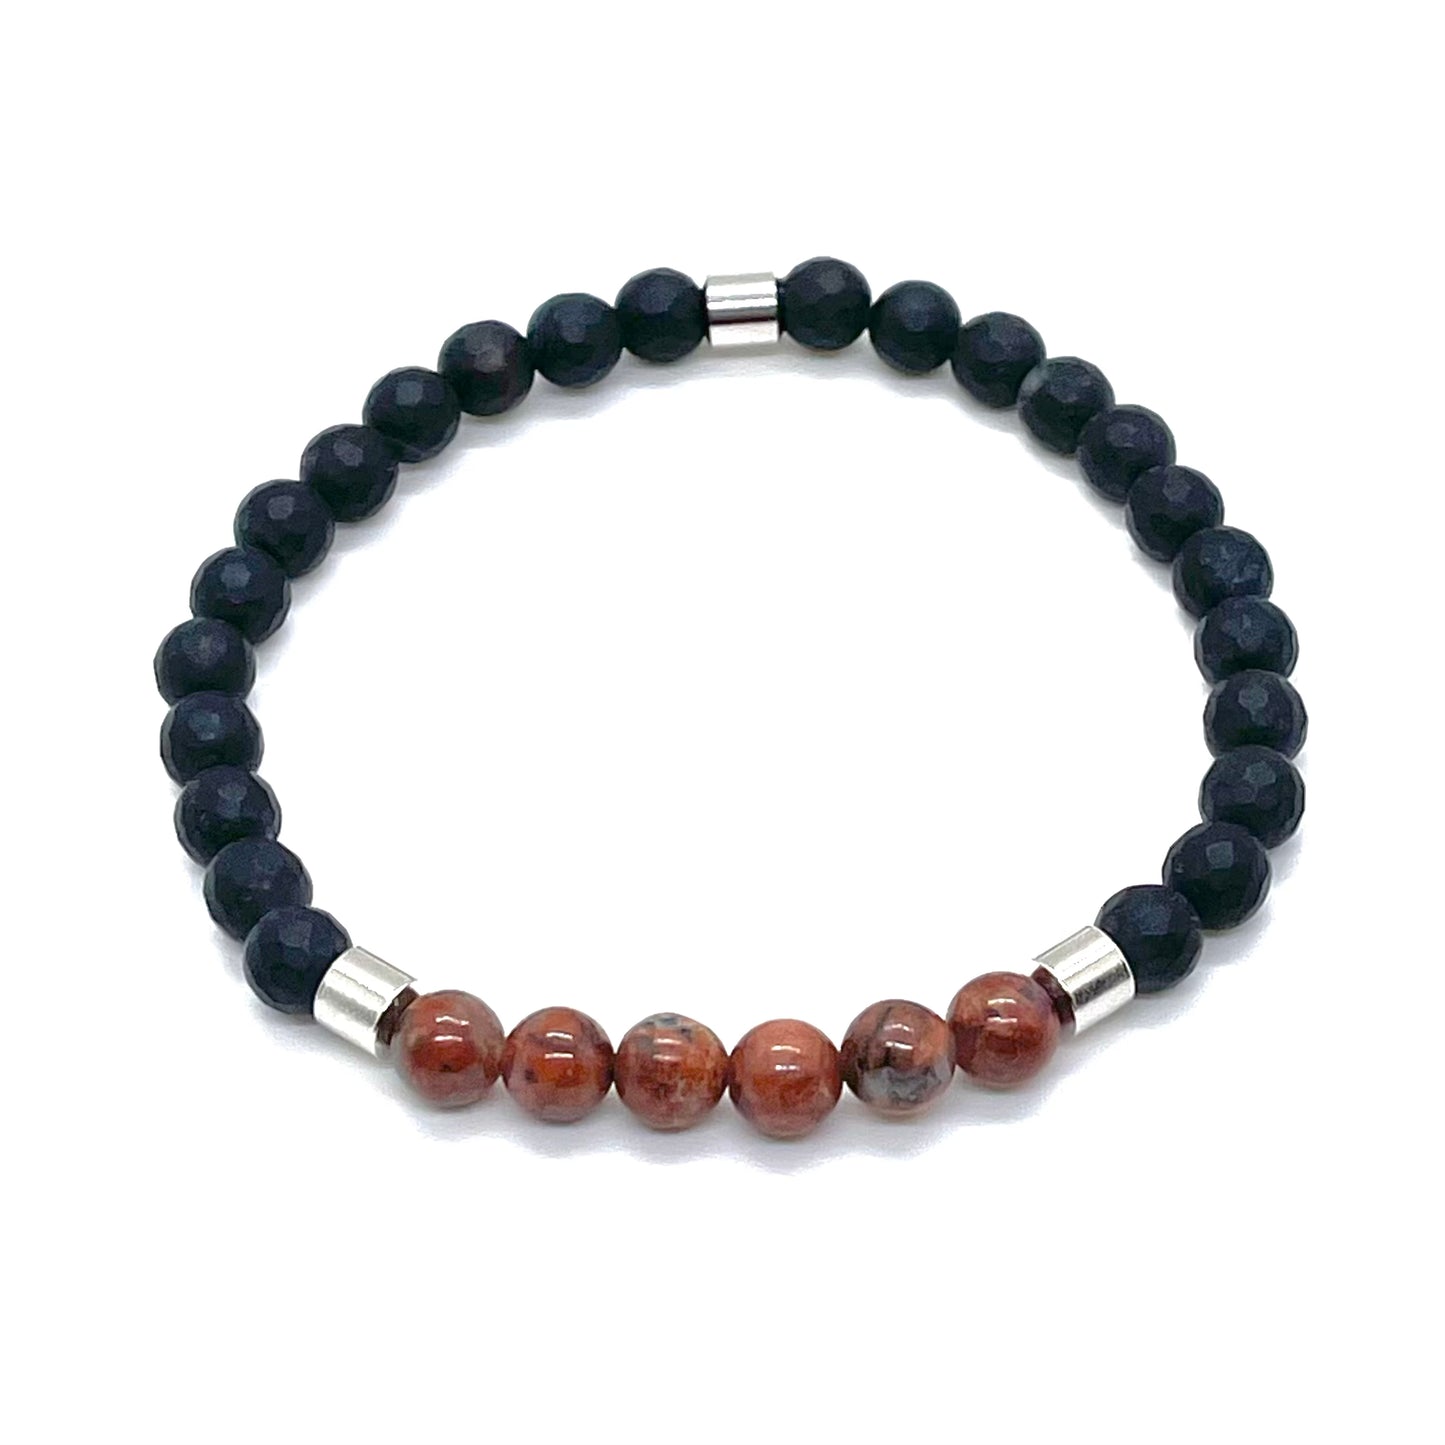 Mens black onyx bracelet with brown jasper gemstones and stainless steel accent beads.